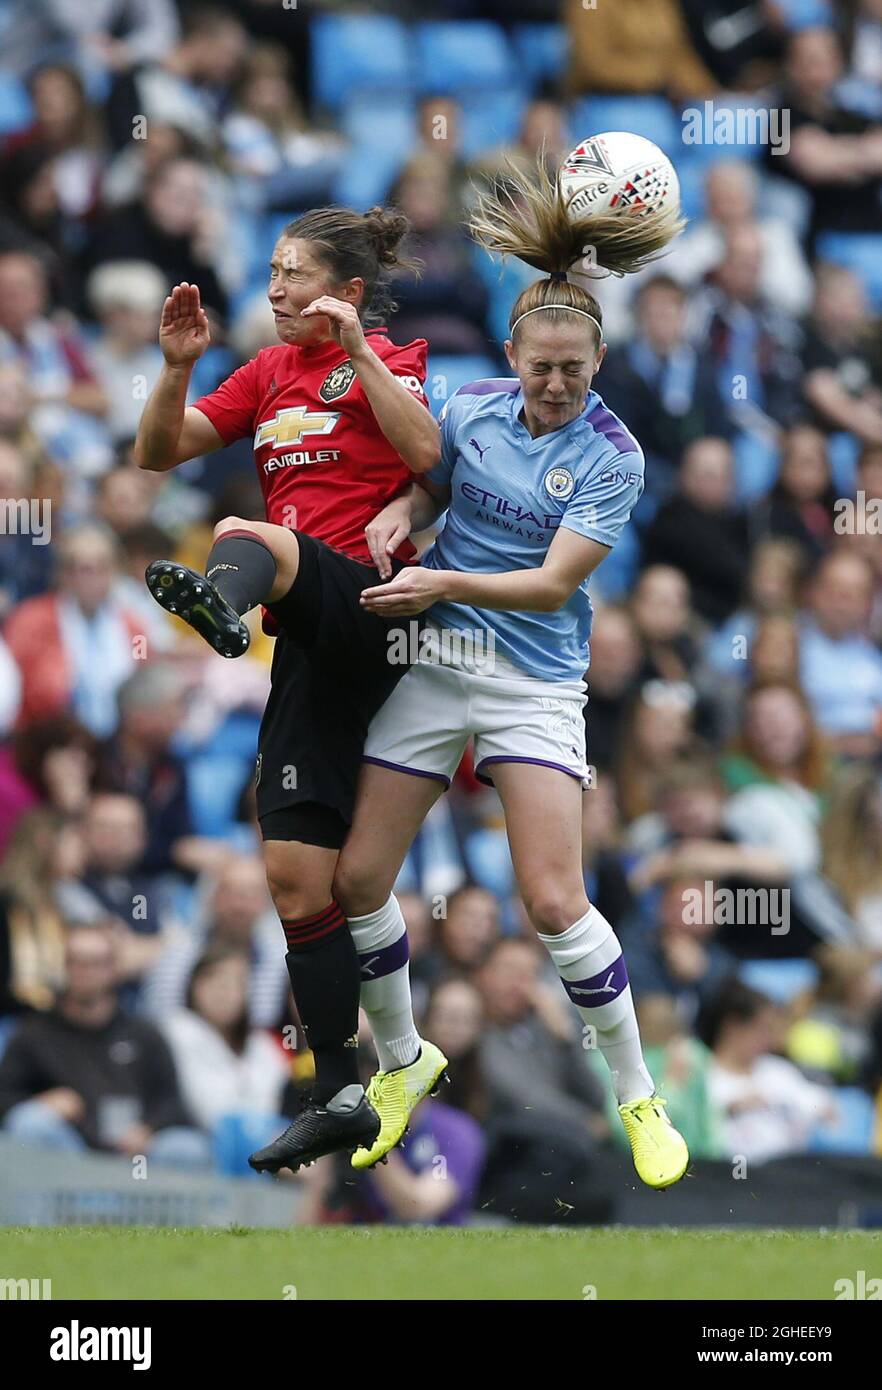 Jane Ross of Manchester United Women challenges of Keira Walsh of Manchester City Women during the The FA WomenÕs Super League match at the Etihad Stadium, Manchester. Picture date: 7th September 2019. Picture credit should read: Andrew Yates/Sportimage via PA Images Stock Photo